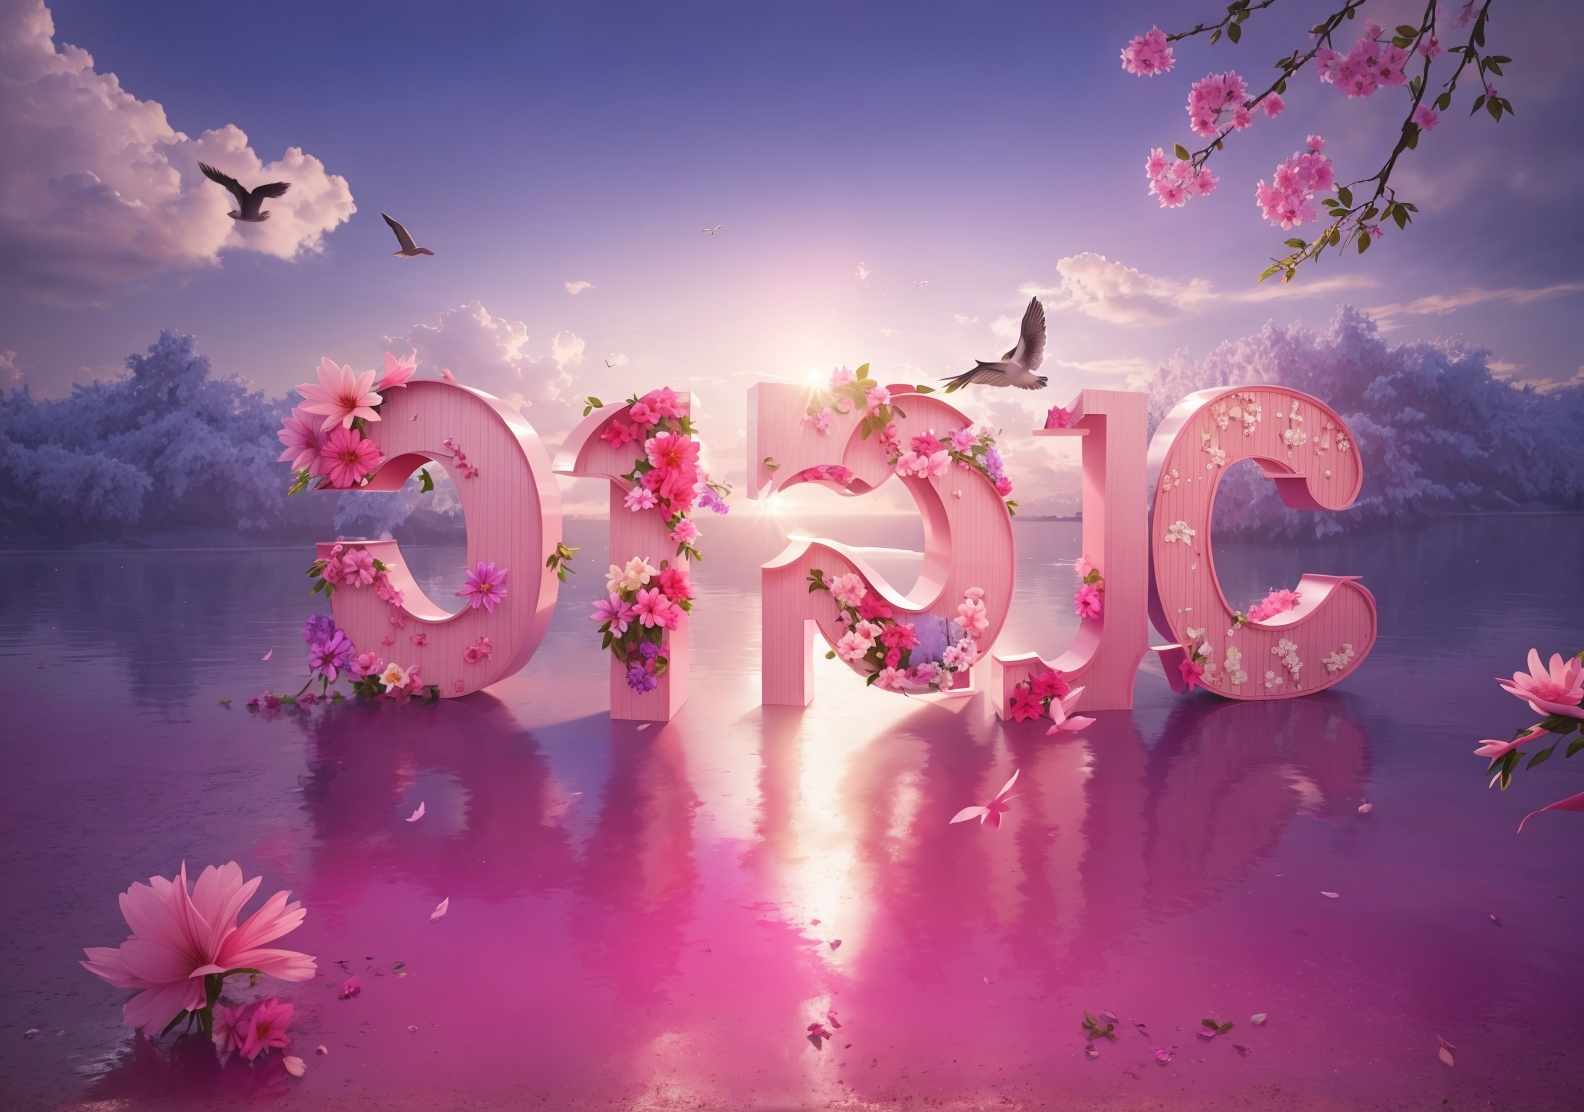 Anime_Pastel_Dream_3D_pink_wooden_letters_on_a_background_of_f_3.jpg